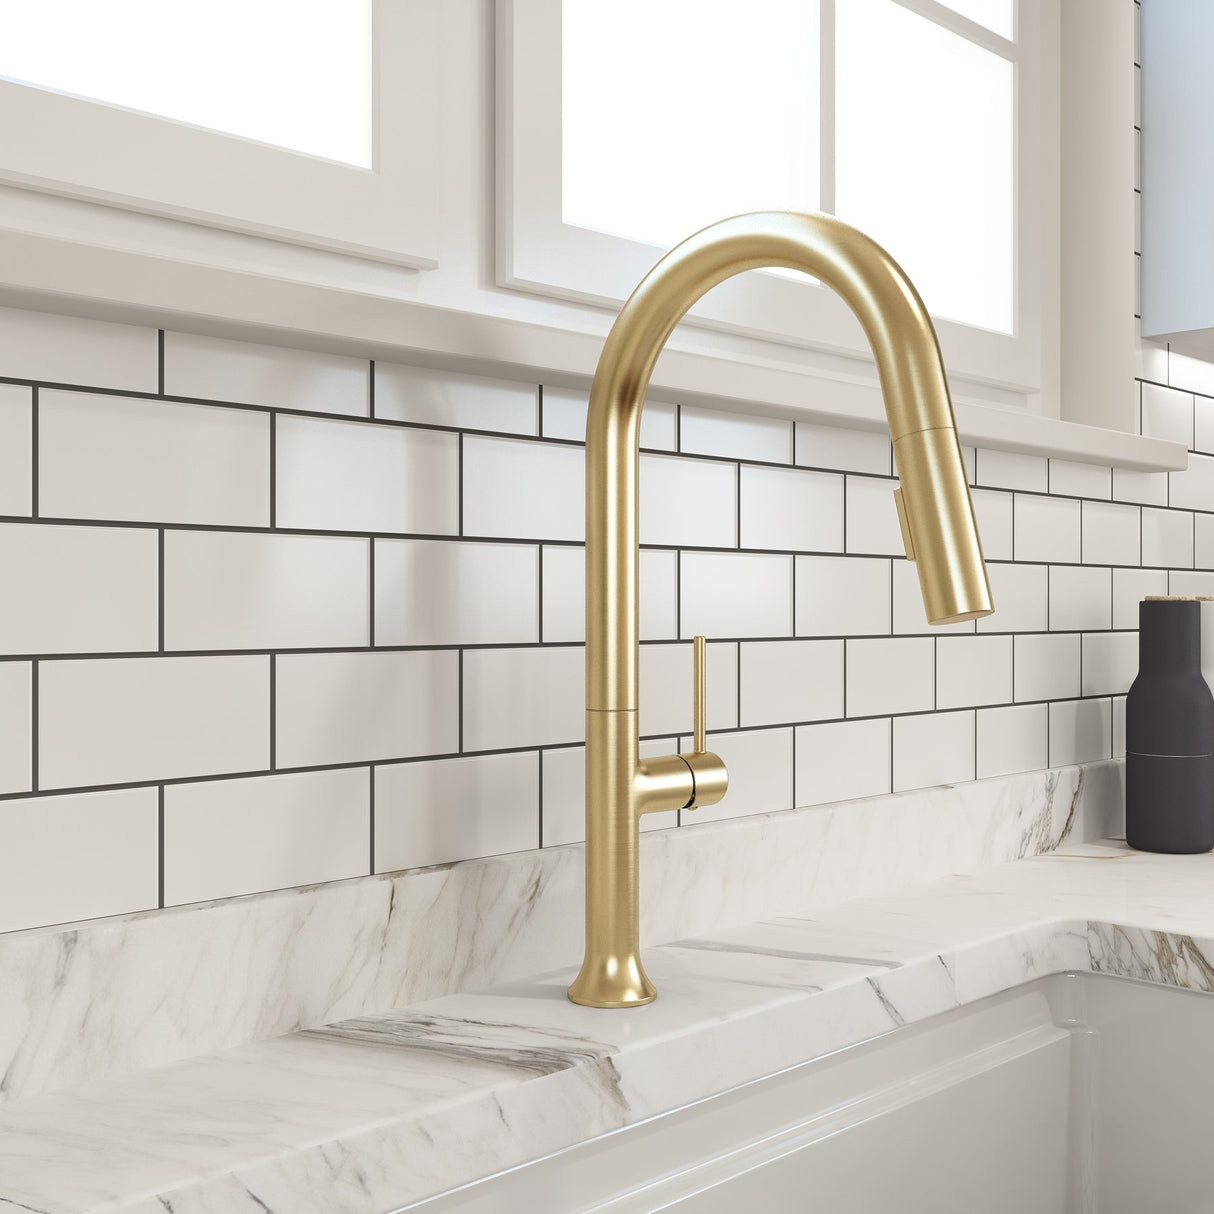 BOCCHI 2026 0001 BG Tronto 2.0 Pull-Down Kitchen Faucet in Brushed Gold